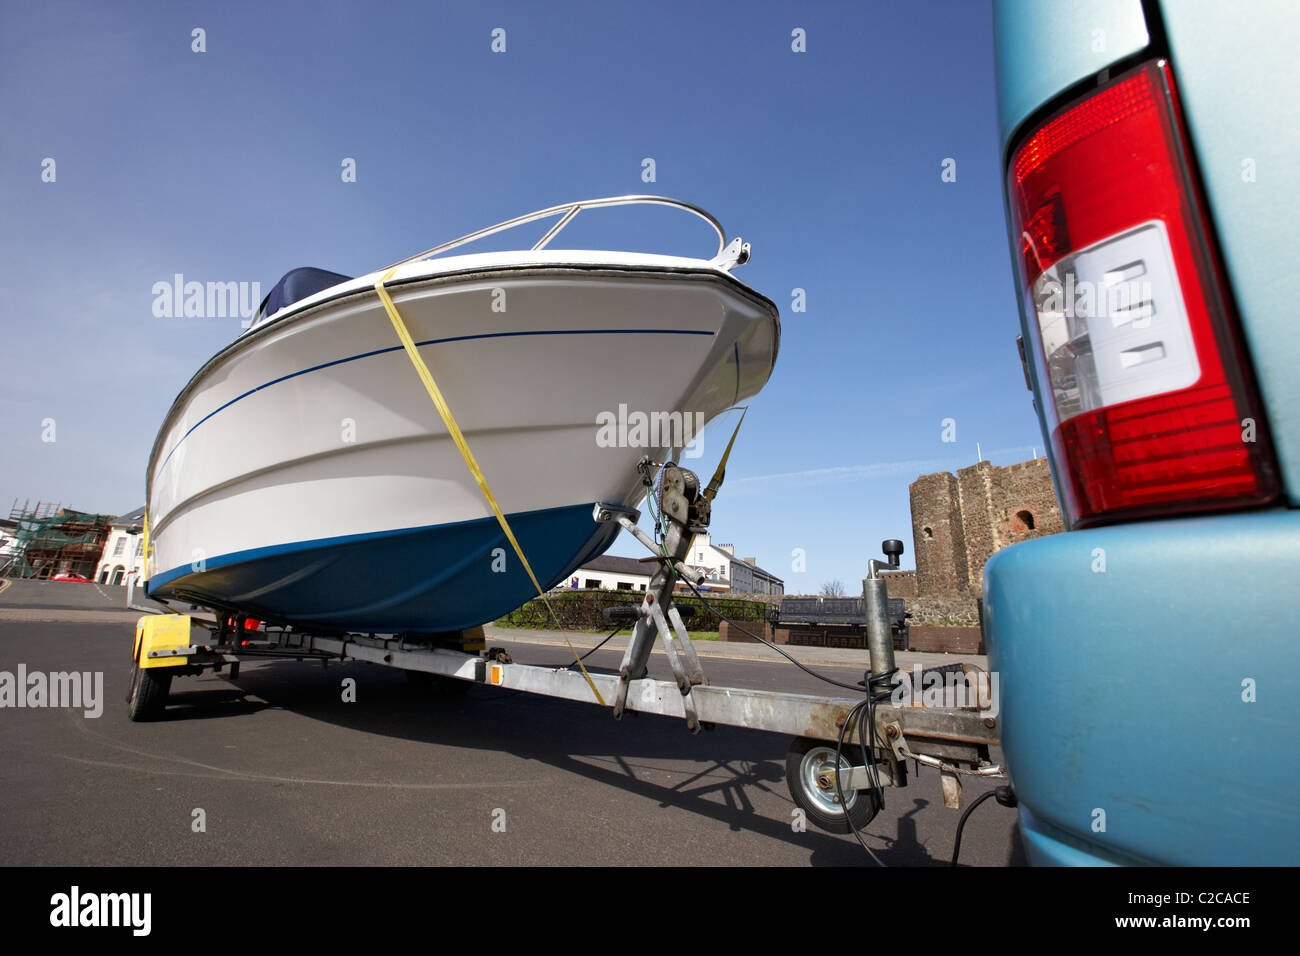 low angle view of car towing boat on trailer in the uk Stock Photo